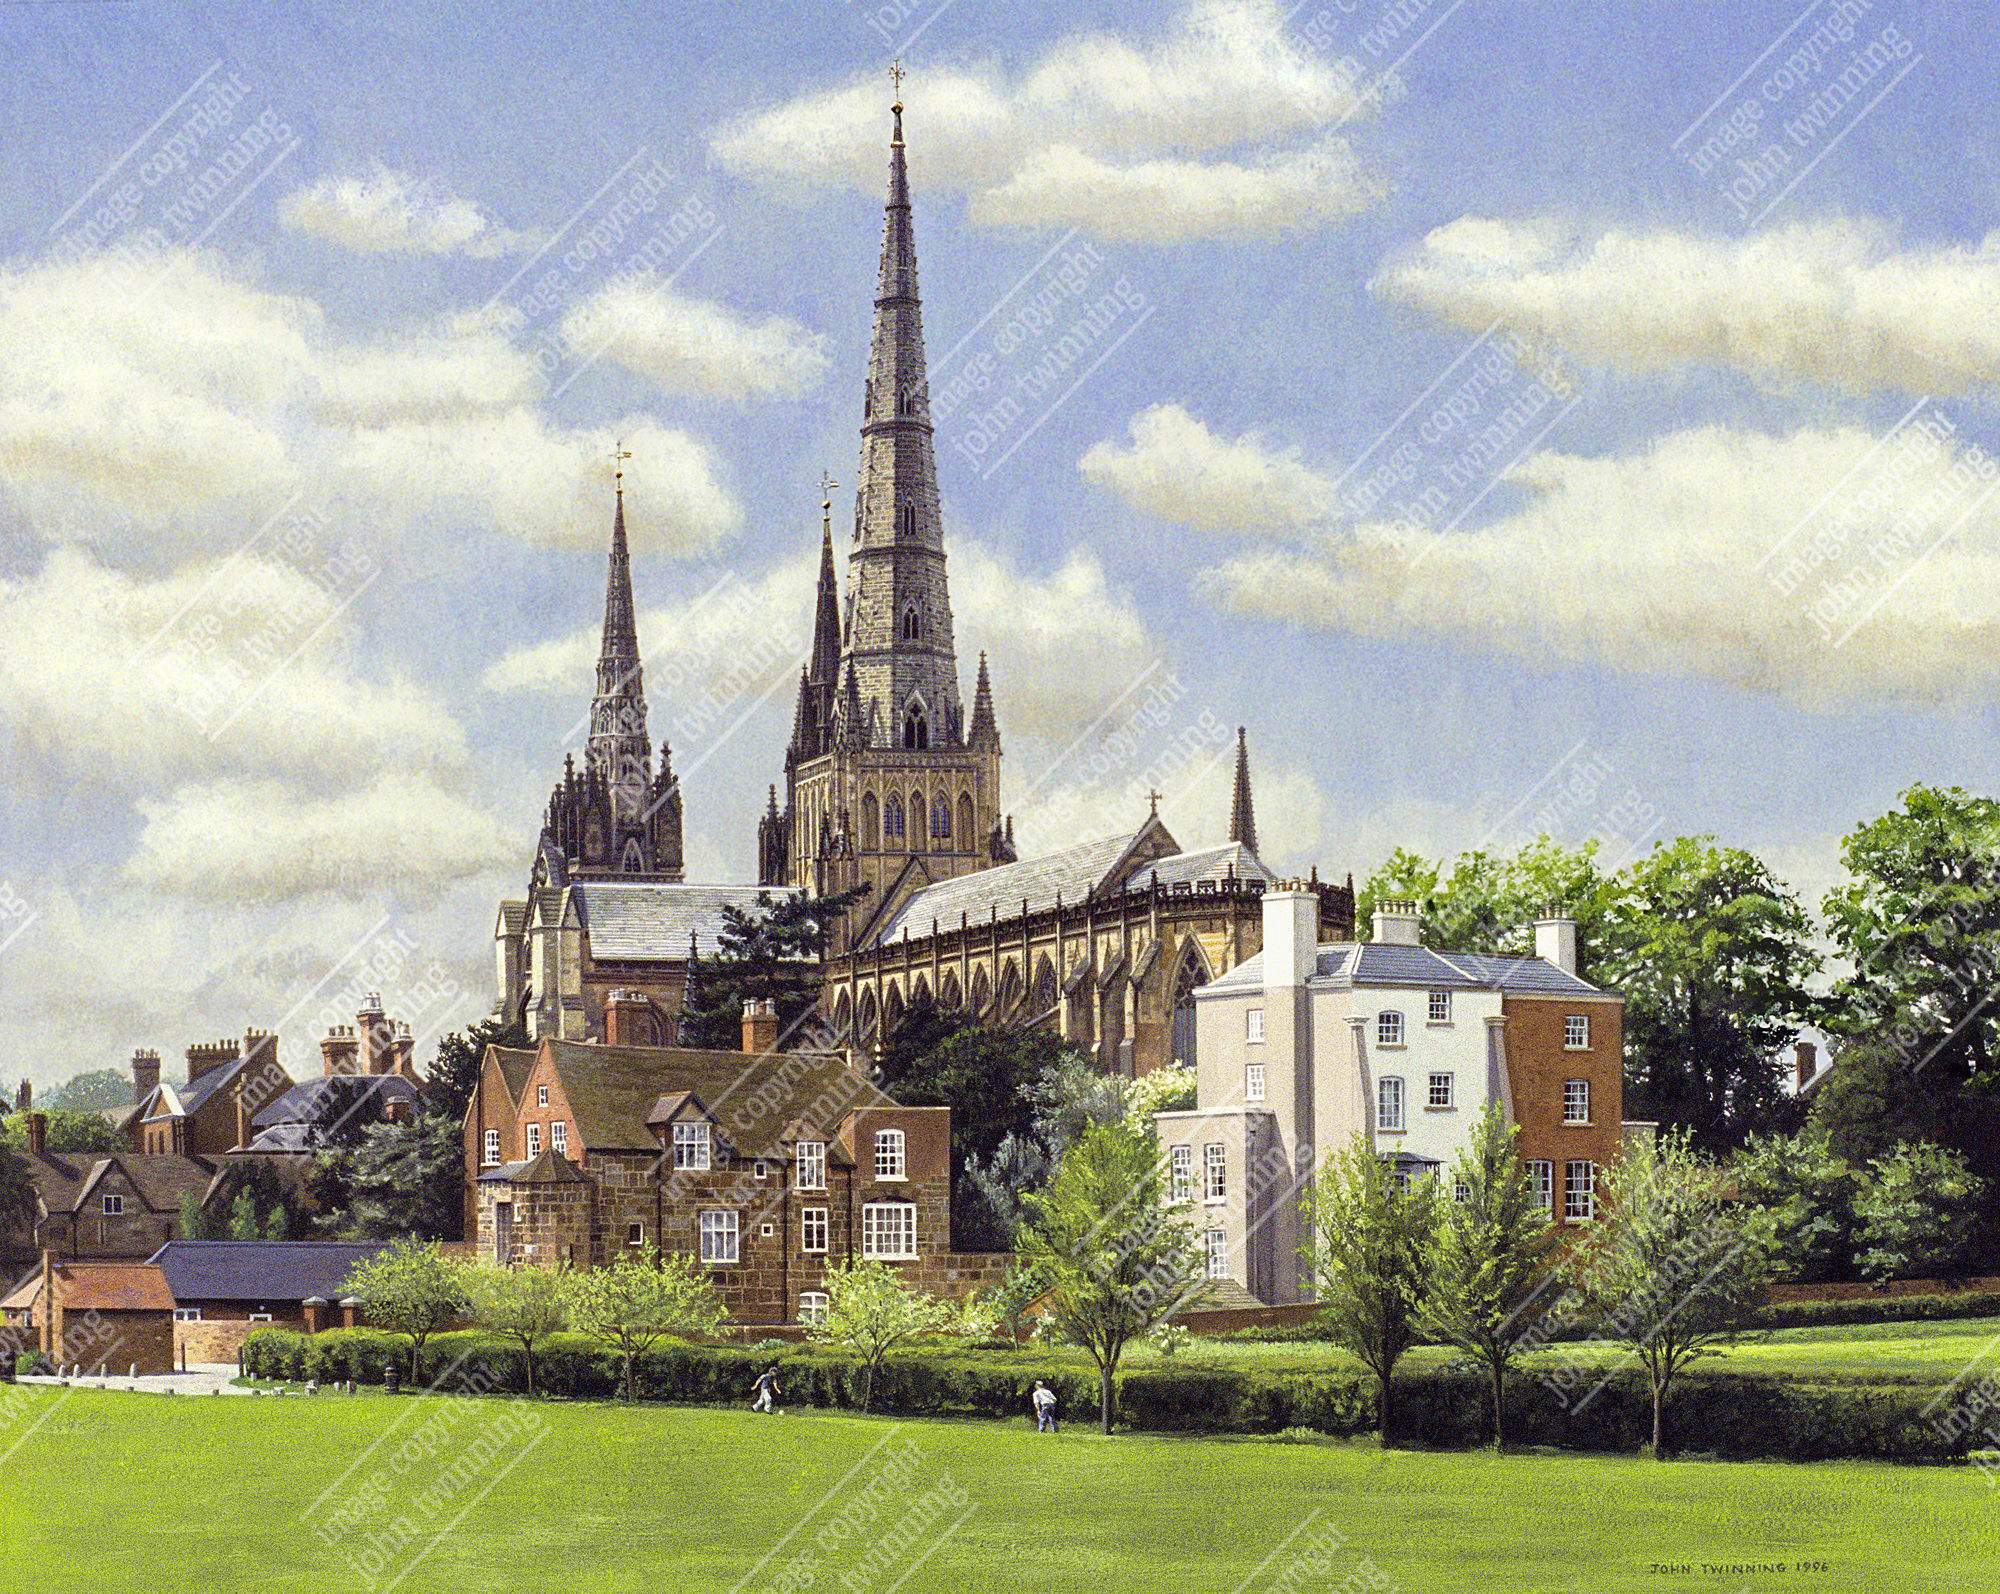 'Lichfield Cathedral From Stowe Fields' - art print from a painting of this staffordshire city's historic church